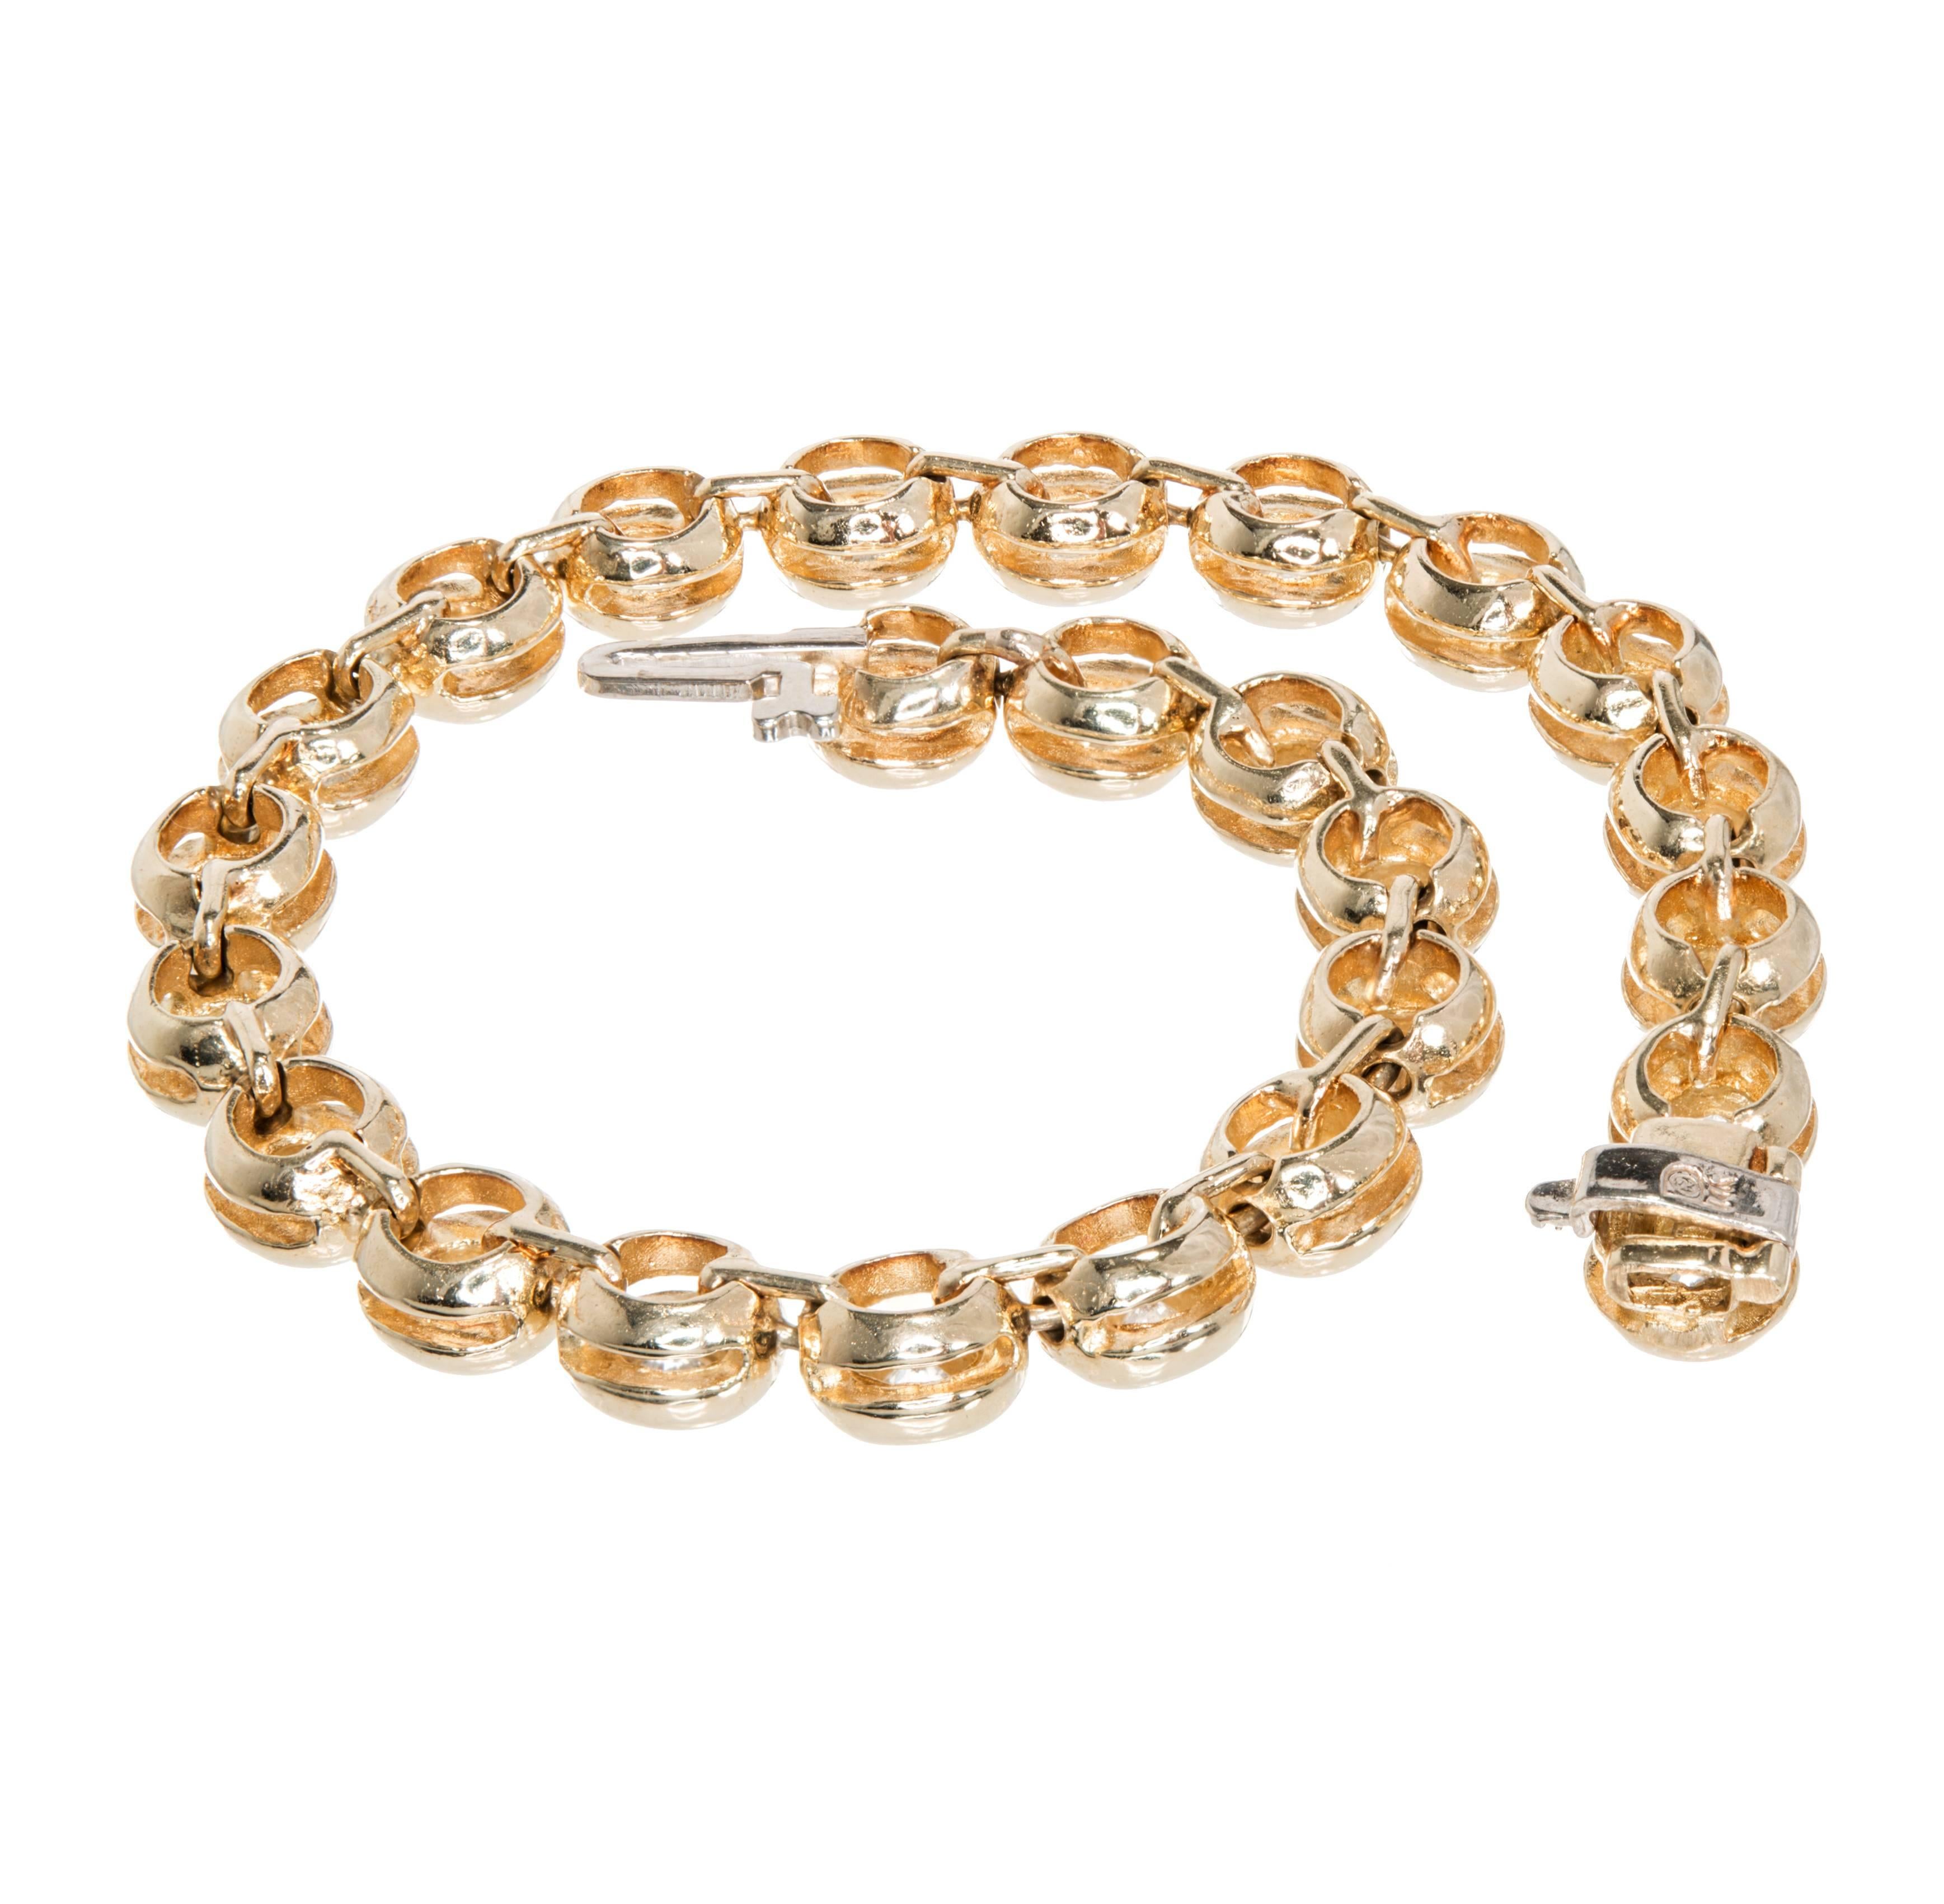 Diamond hinged bracelet. Set in 14k  yellow gold, this bracelet features 25 brilliant cut diamonds totaling 5.25cts. Each diamond is set in a bubble style bezel set tube. The yellow gold setting enhances the brilliance of the diamonds, adding warmth